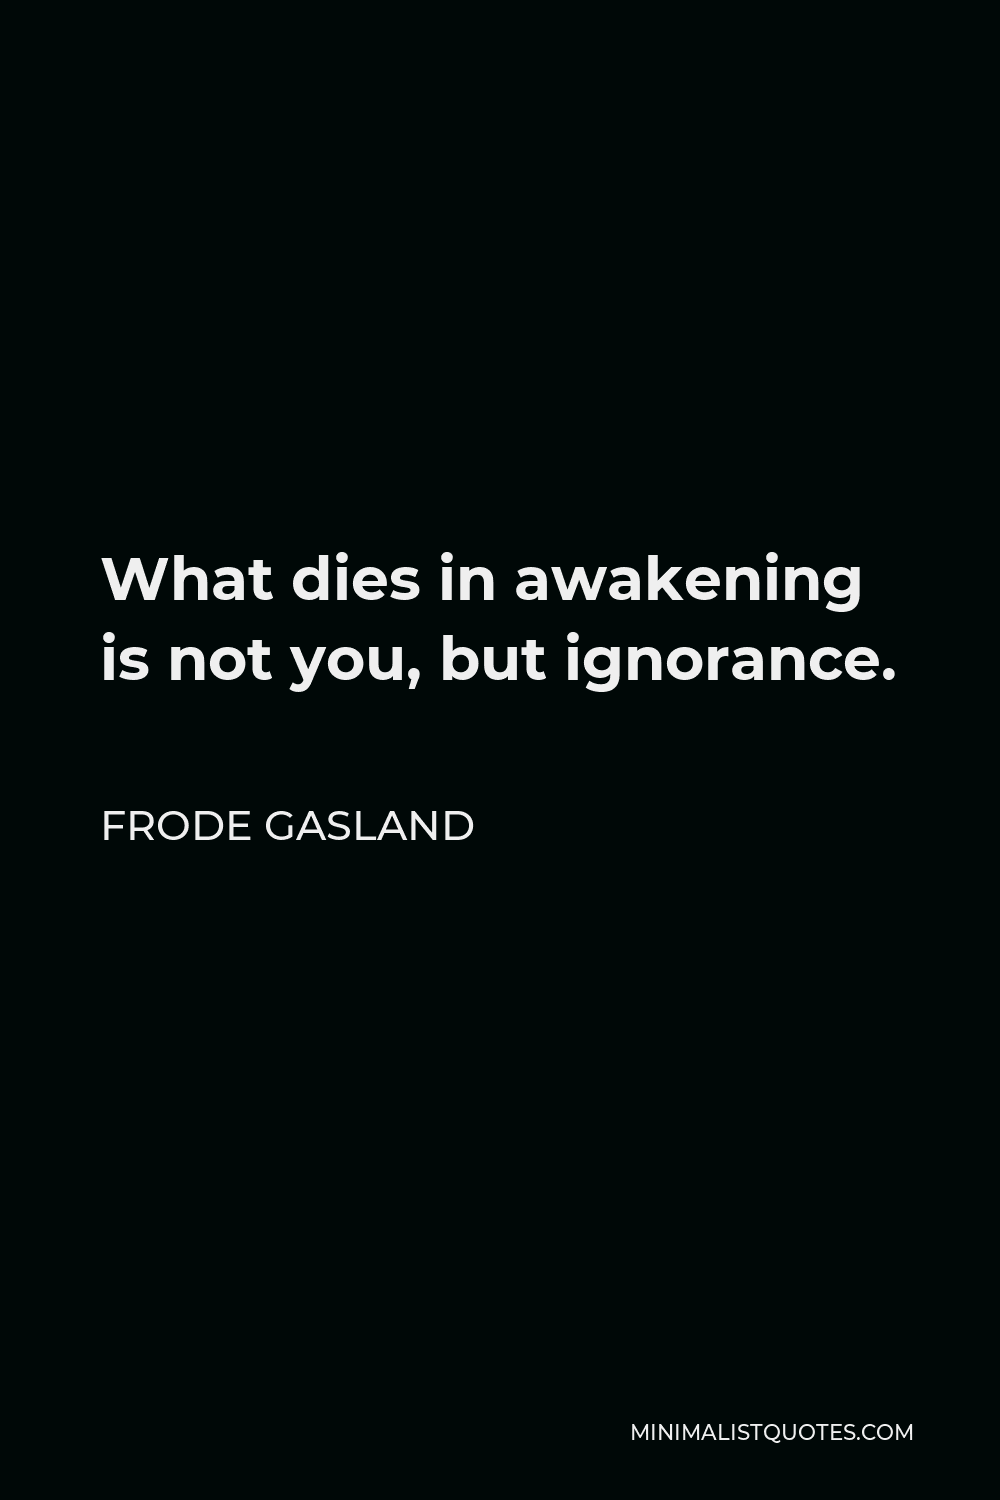 Frode Gasland Quote - What dies in awakening is not you, but ignorance.